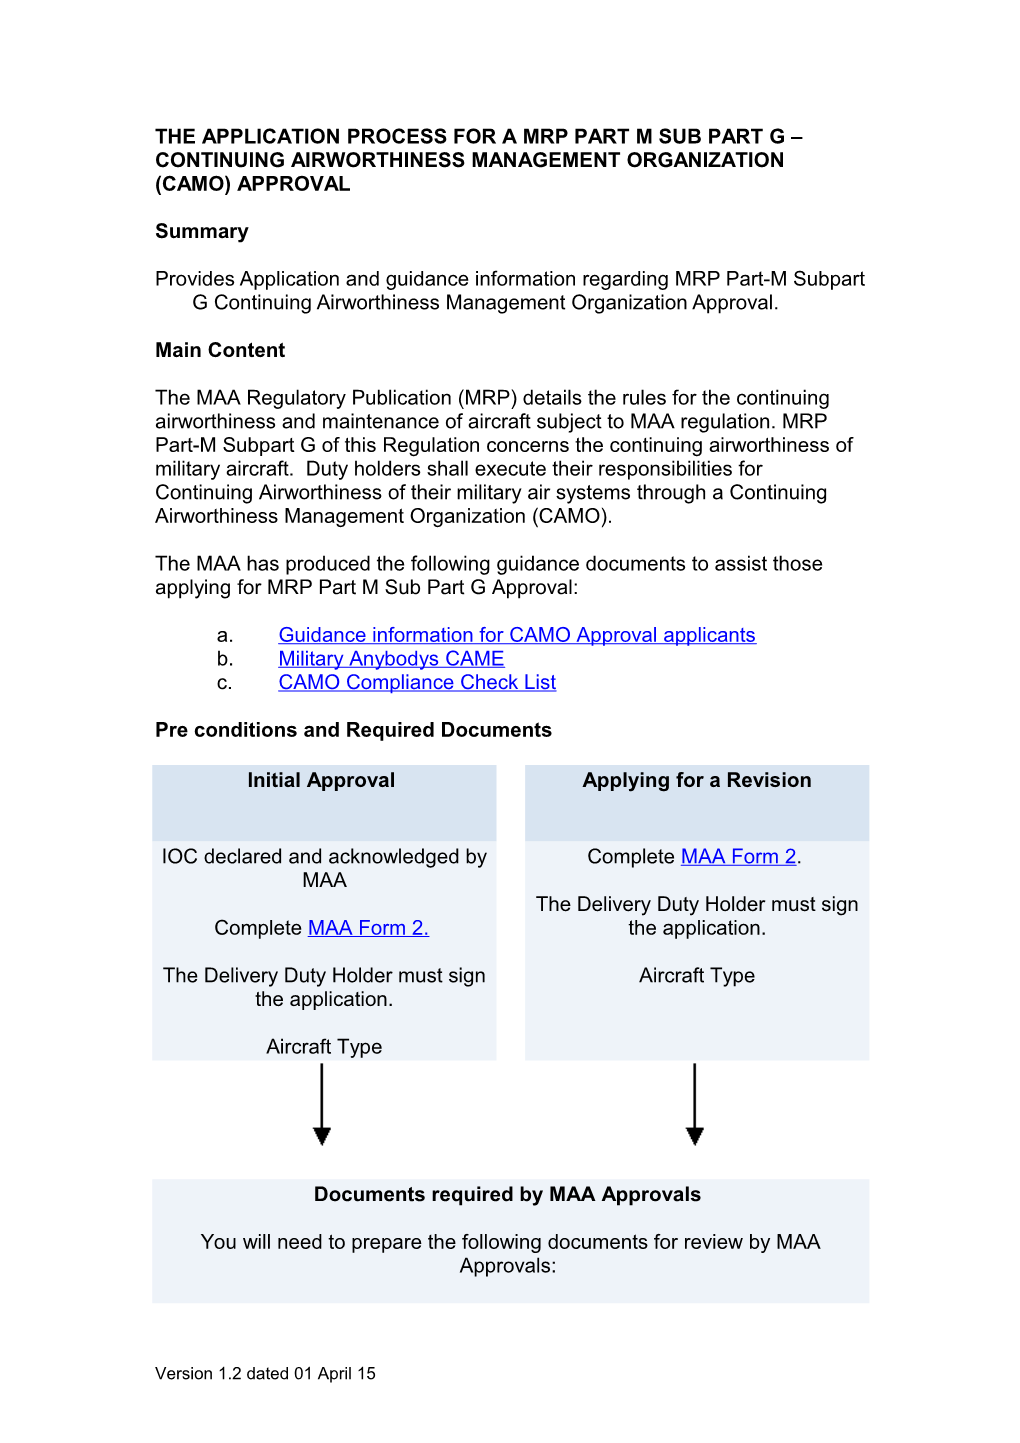 The Application Process for a Mrp Part M Subpart G Continuing Airworthiness Management